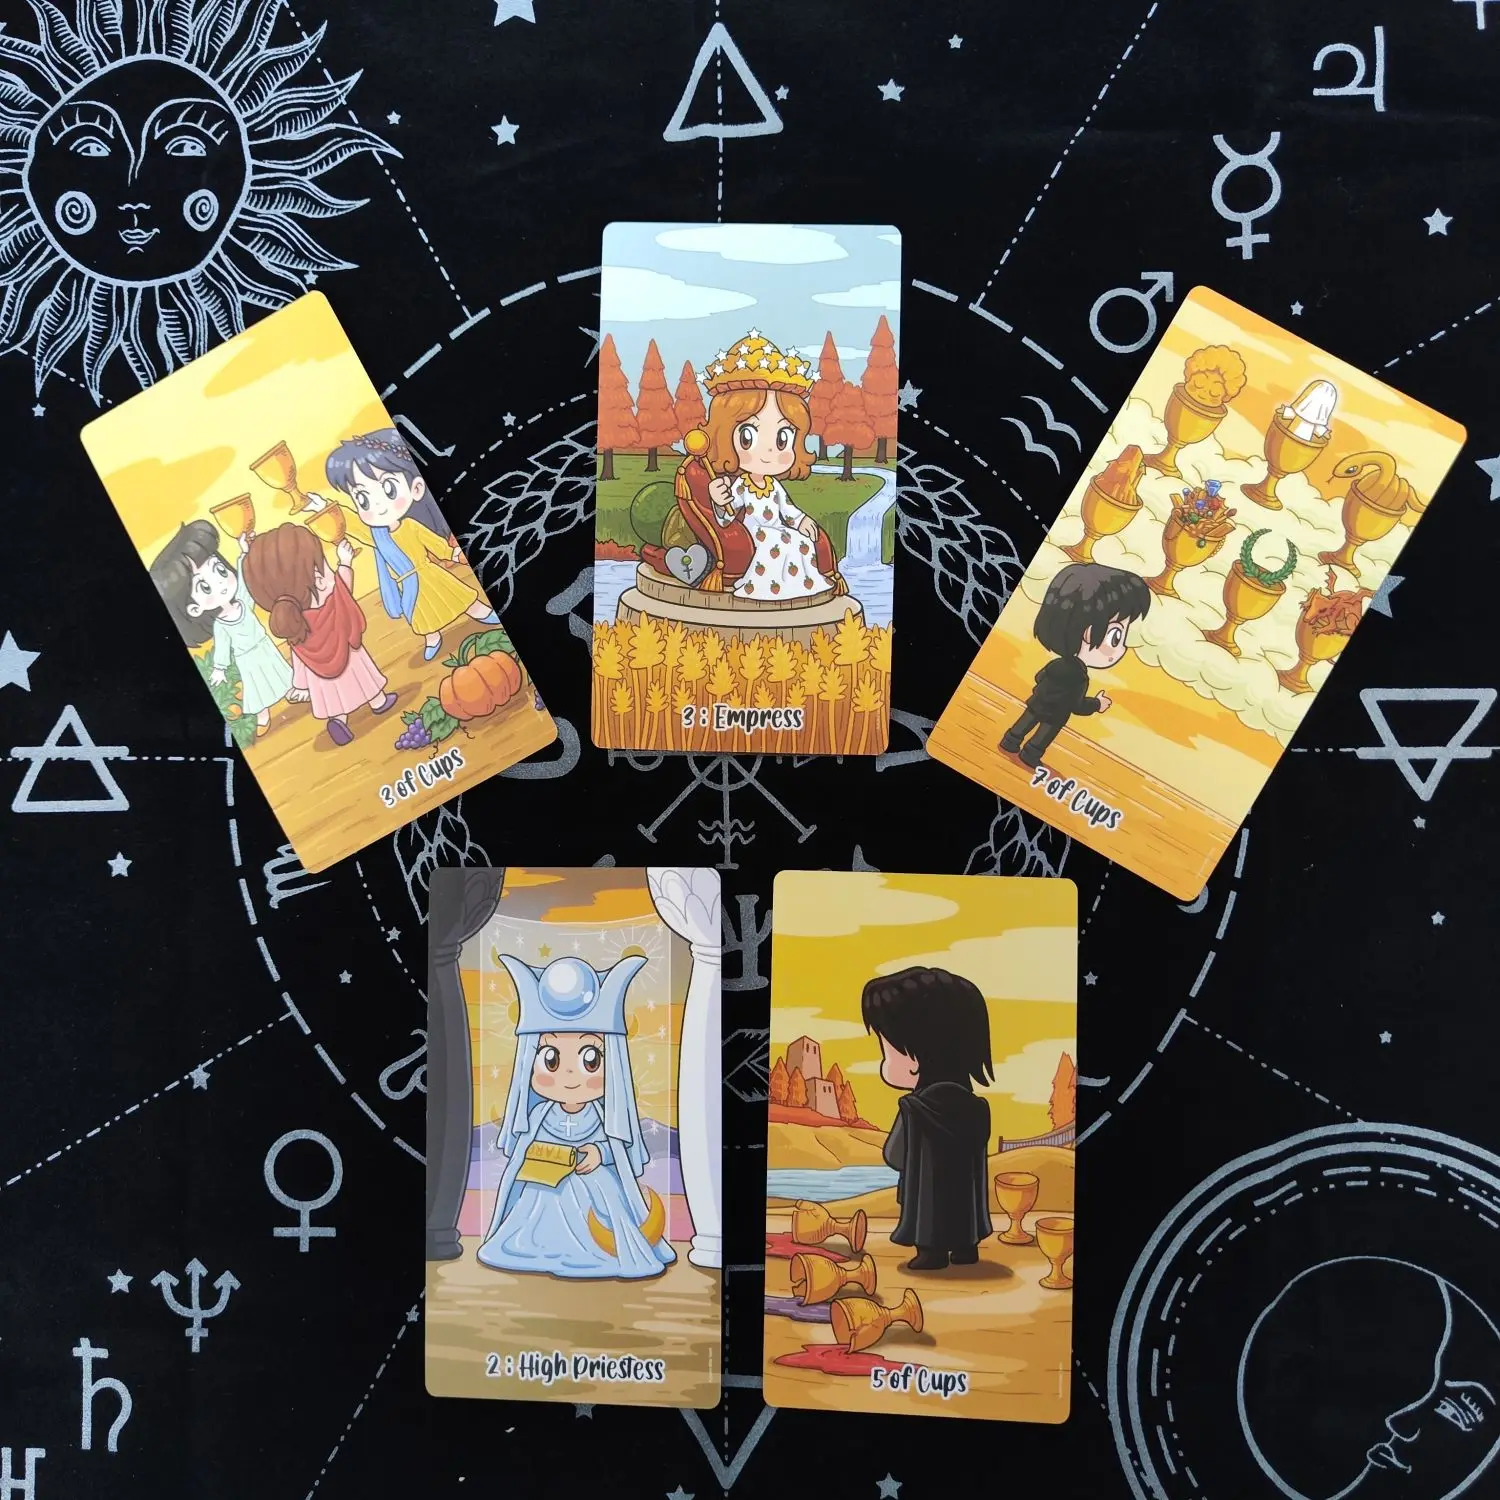 New 12x7cm Autumn Miss Tarot 79 Cards/Set With Guidebook Lovely Figures Pattern For Friends Gift Divination Future Board Games enlarge